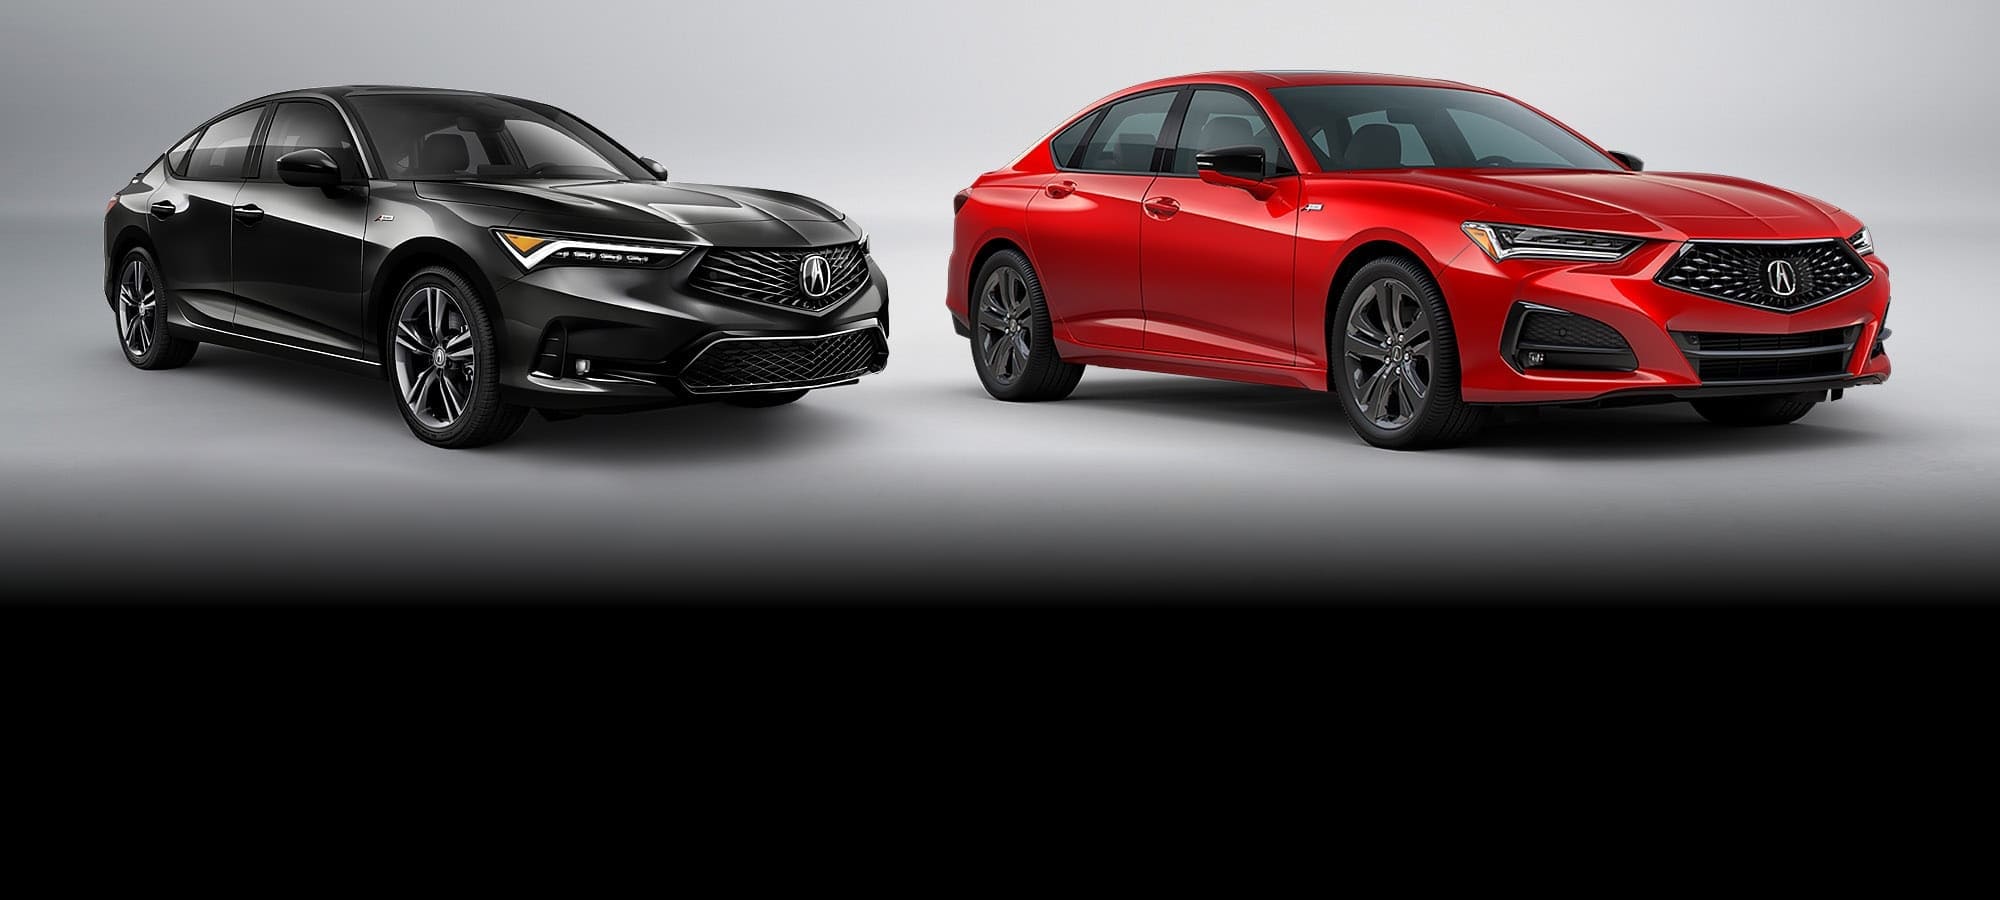 Looking for a new Acura sedan? Naples Acura has a great selection of Acura sedan models available. Choose from the ILX, TLX, RLX, or NSX and enjoy the luxury and performance that Acura is known for.